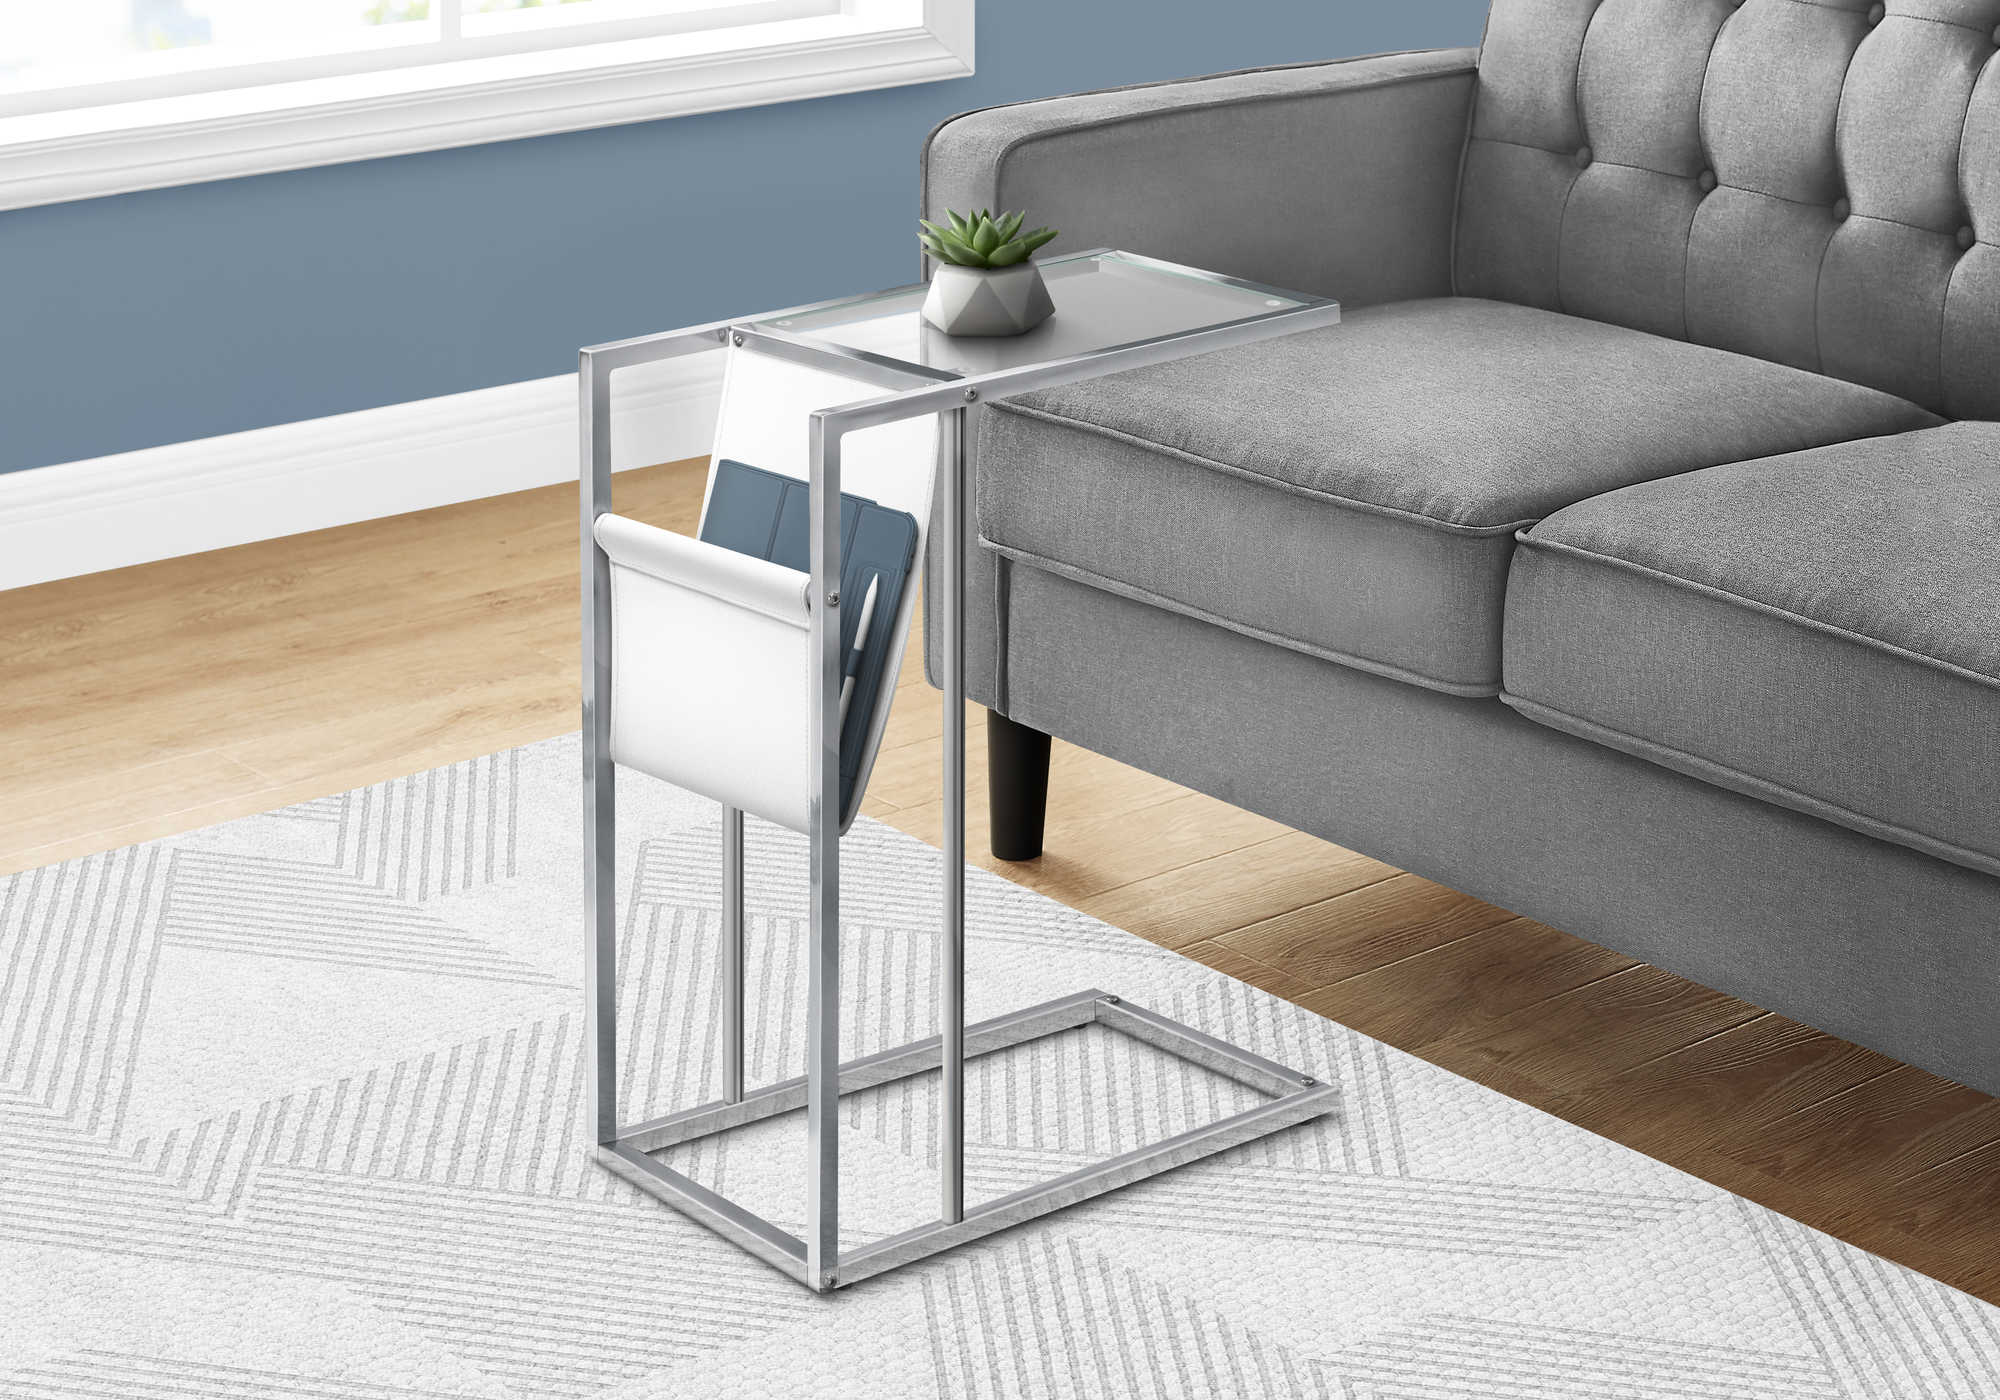 ACCENT TABLE - WHITE / CHROME METAL WITH A MAGAZINE RACK